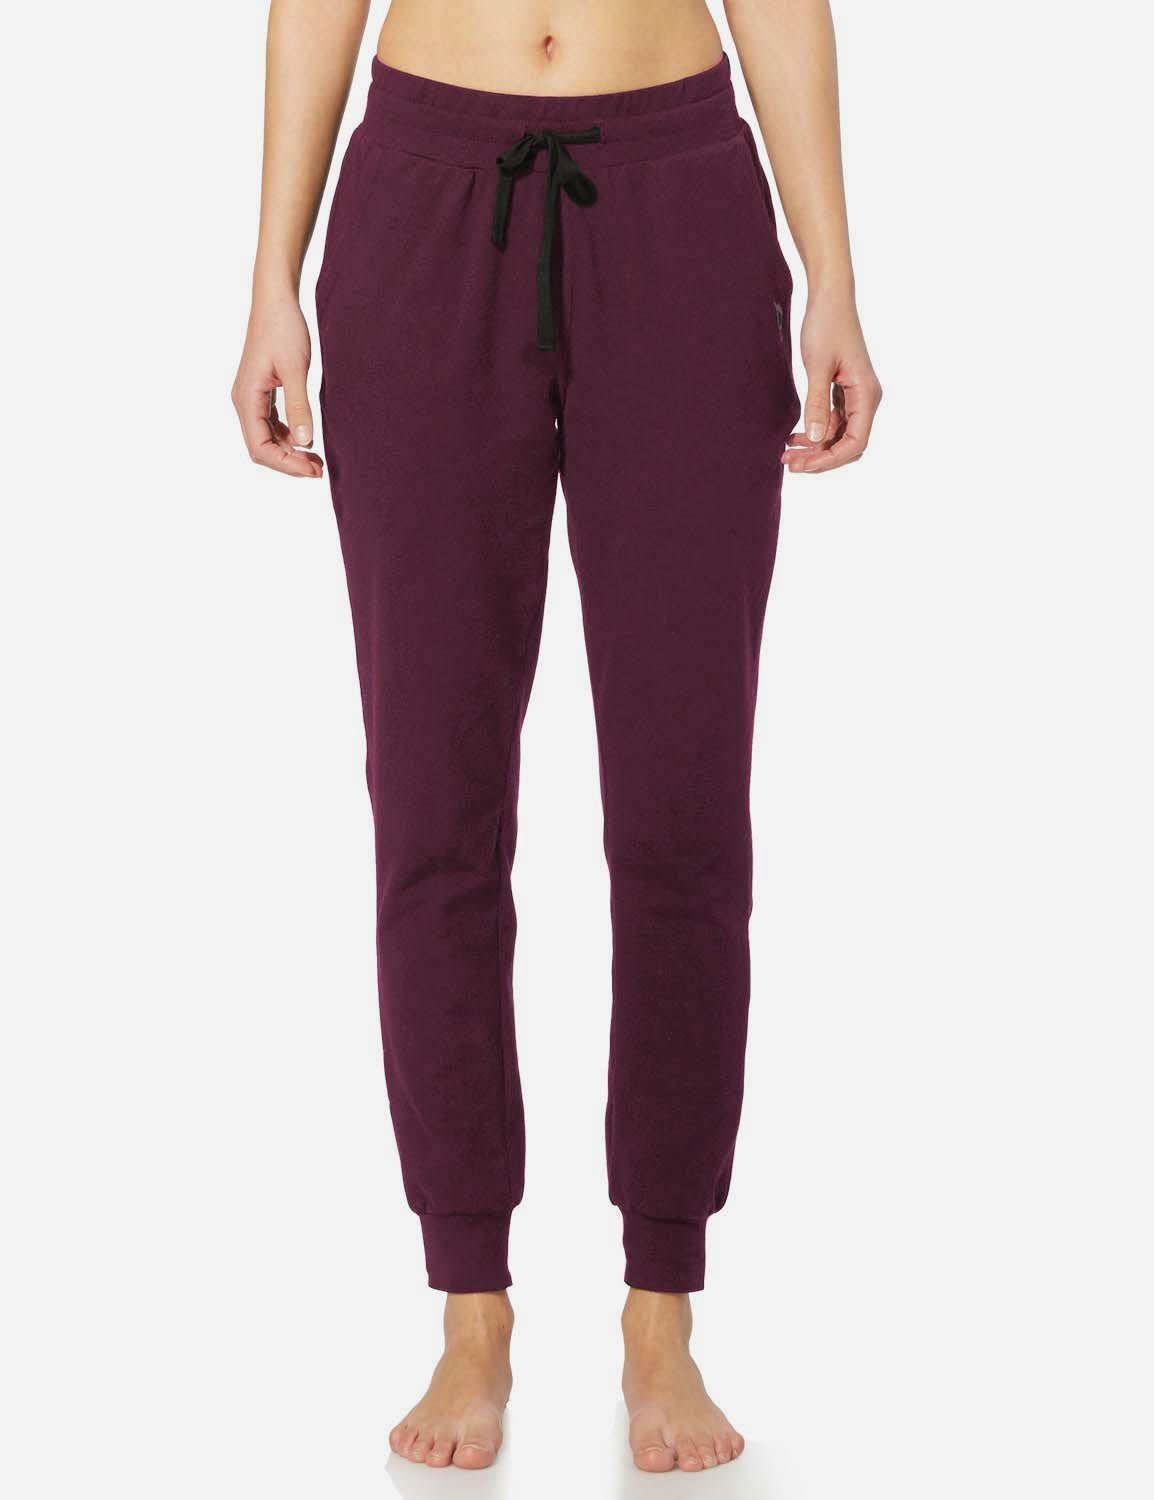 Baleaf Women's Cotton Comfy Pocketed & Tapered Weekend Joggers abh103 Burgundy Front